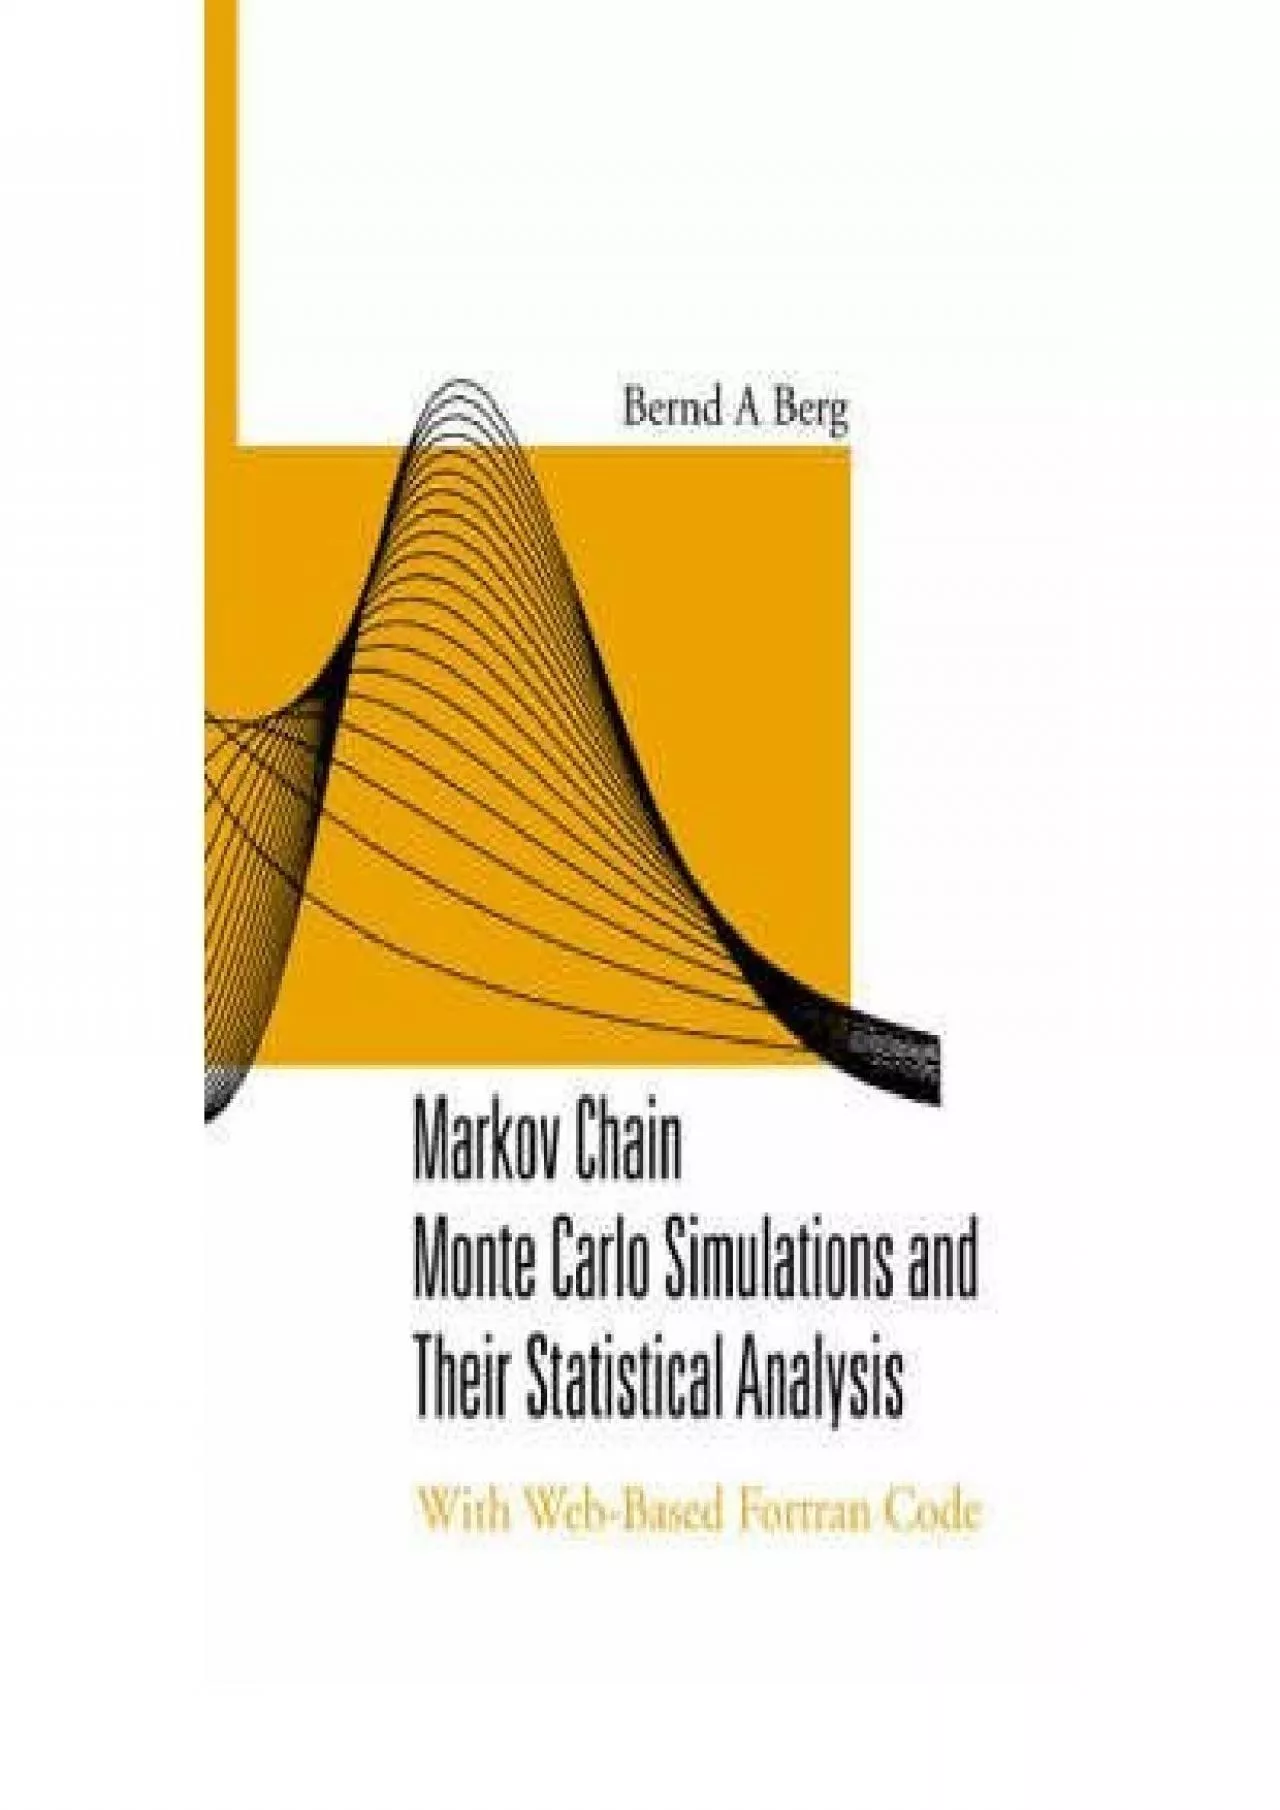 [READING BOOK]-[Markov chain monte carlo simulations and their statistical analysis: with